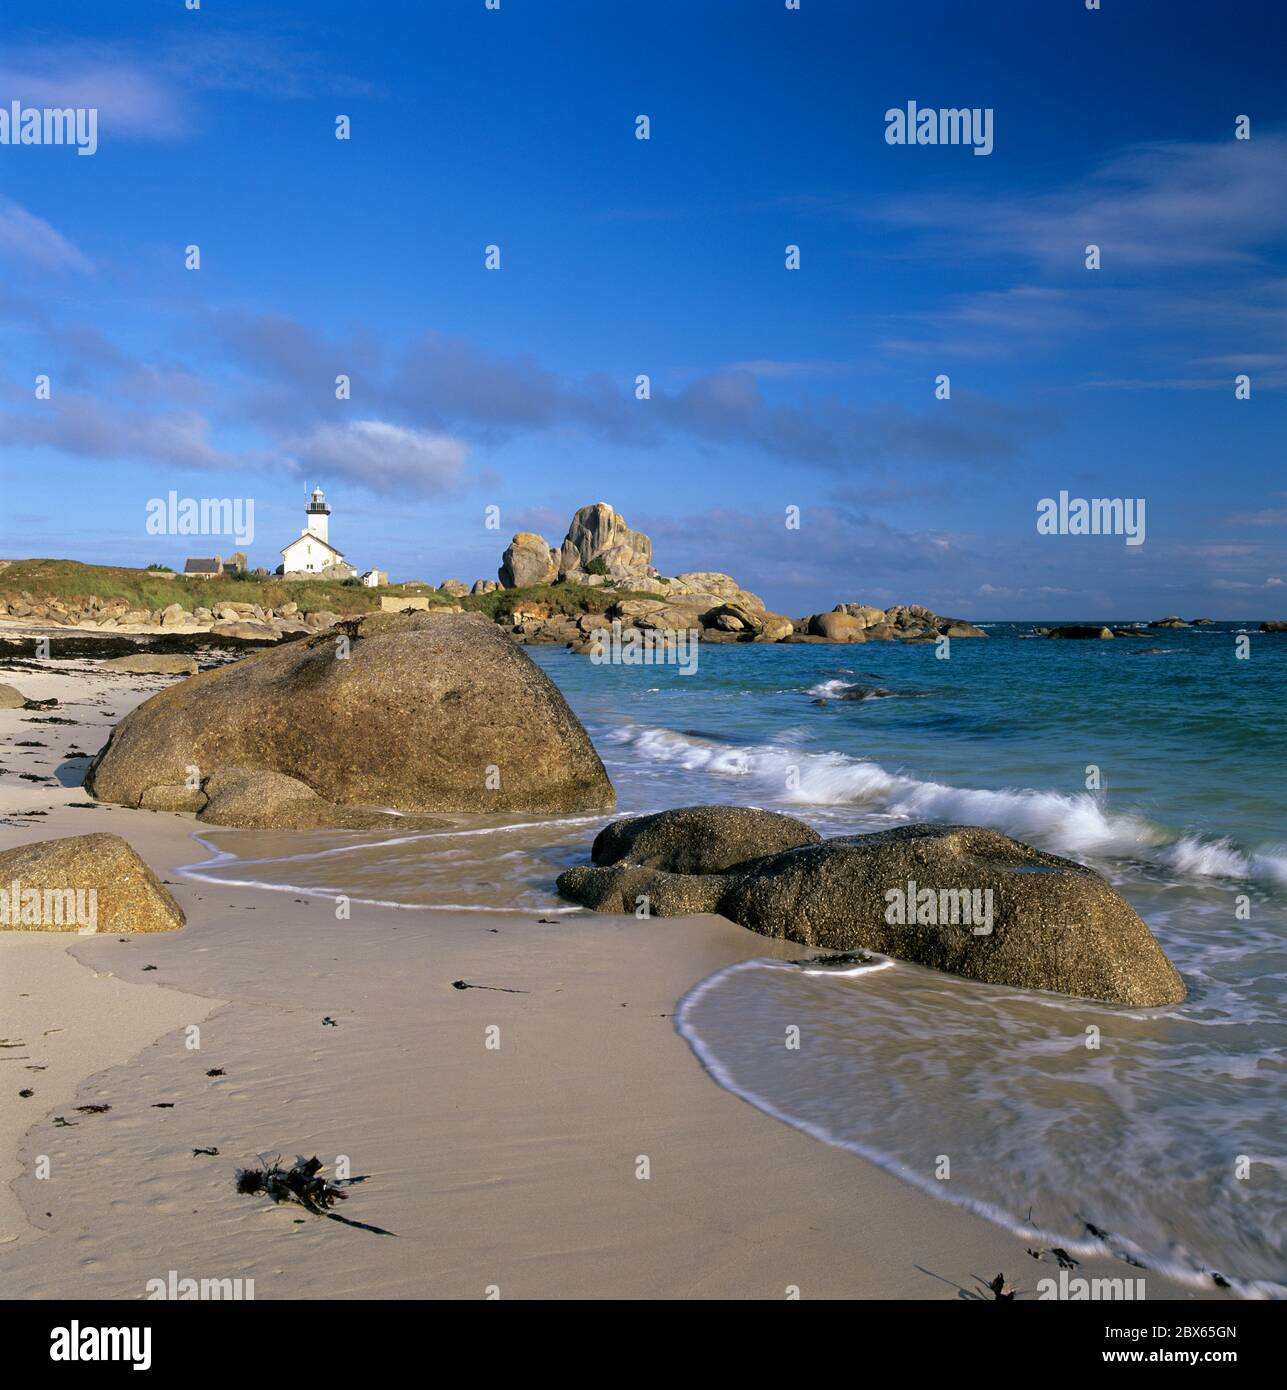 View along beach and rocks to Pointe de Pontusval Lighthouse, Brignogan Plage, Finistere, Brittany, France Stock Photo